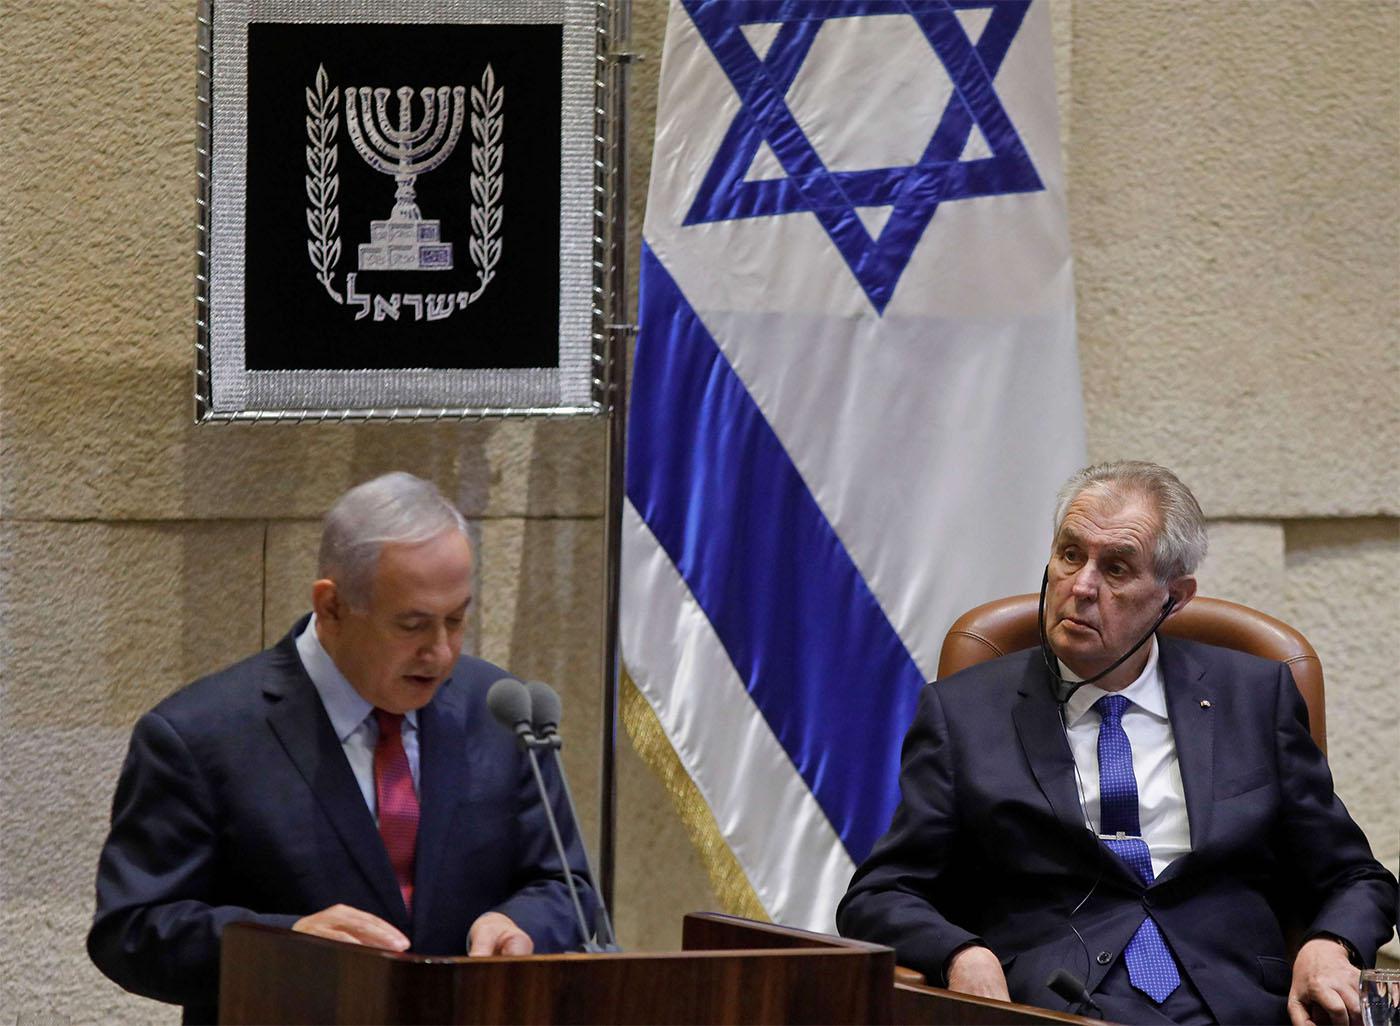 Czech President Milos Zeman listens to Israeli PM Benjamin Netanyahu during a session at the Knesset 